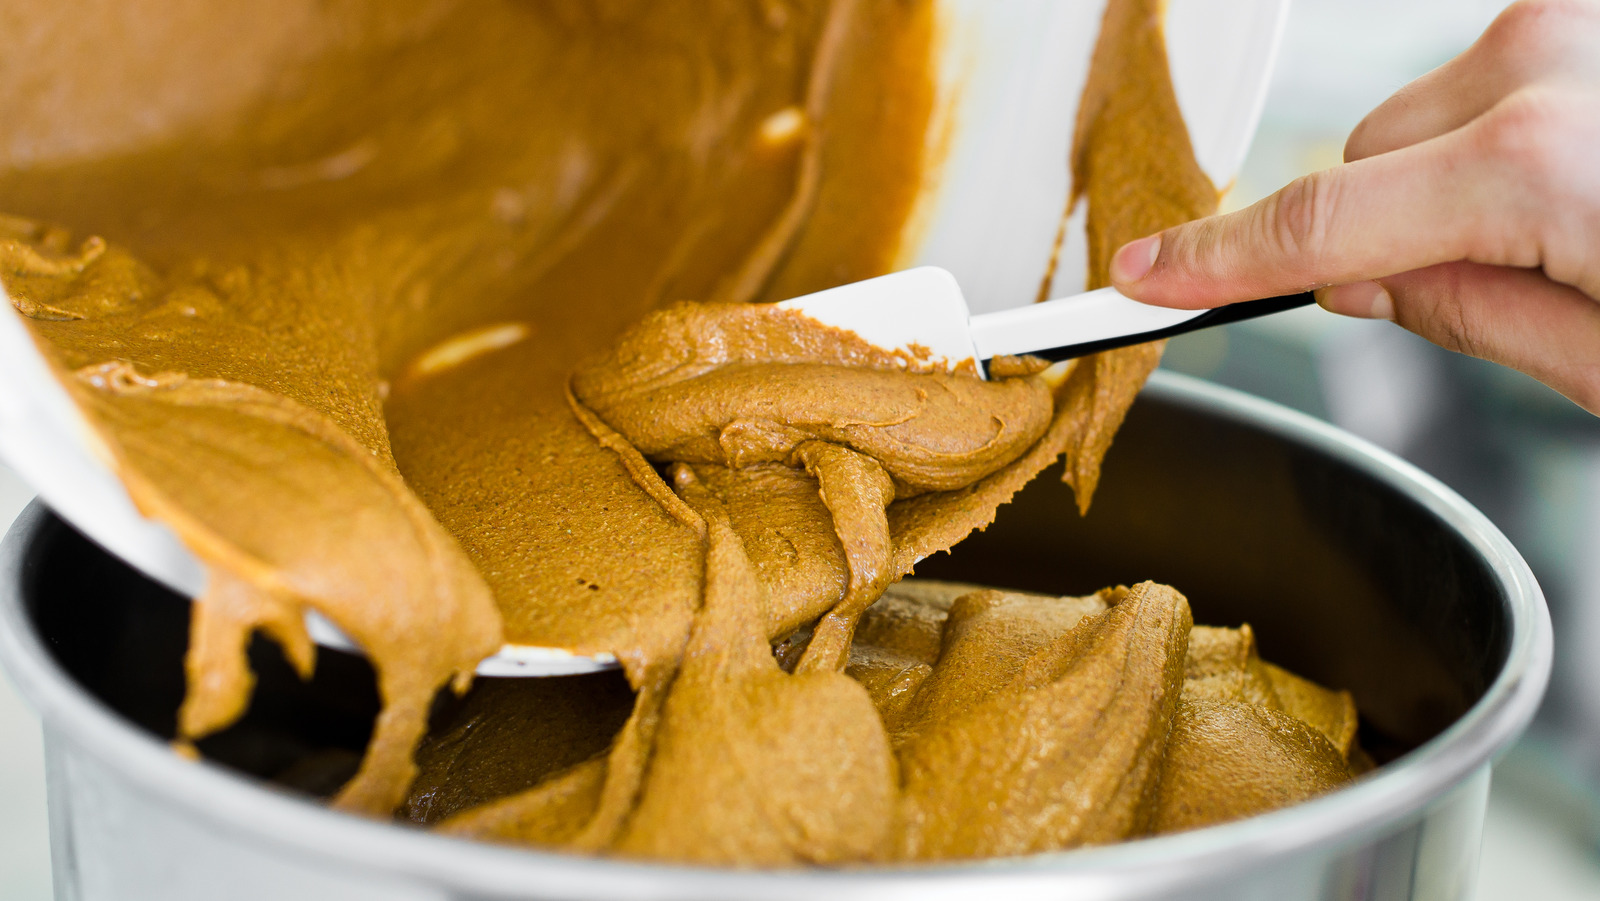 Hack for stirring oil into natural peanut butter, almond butter or any